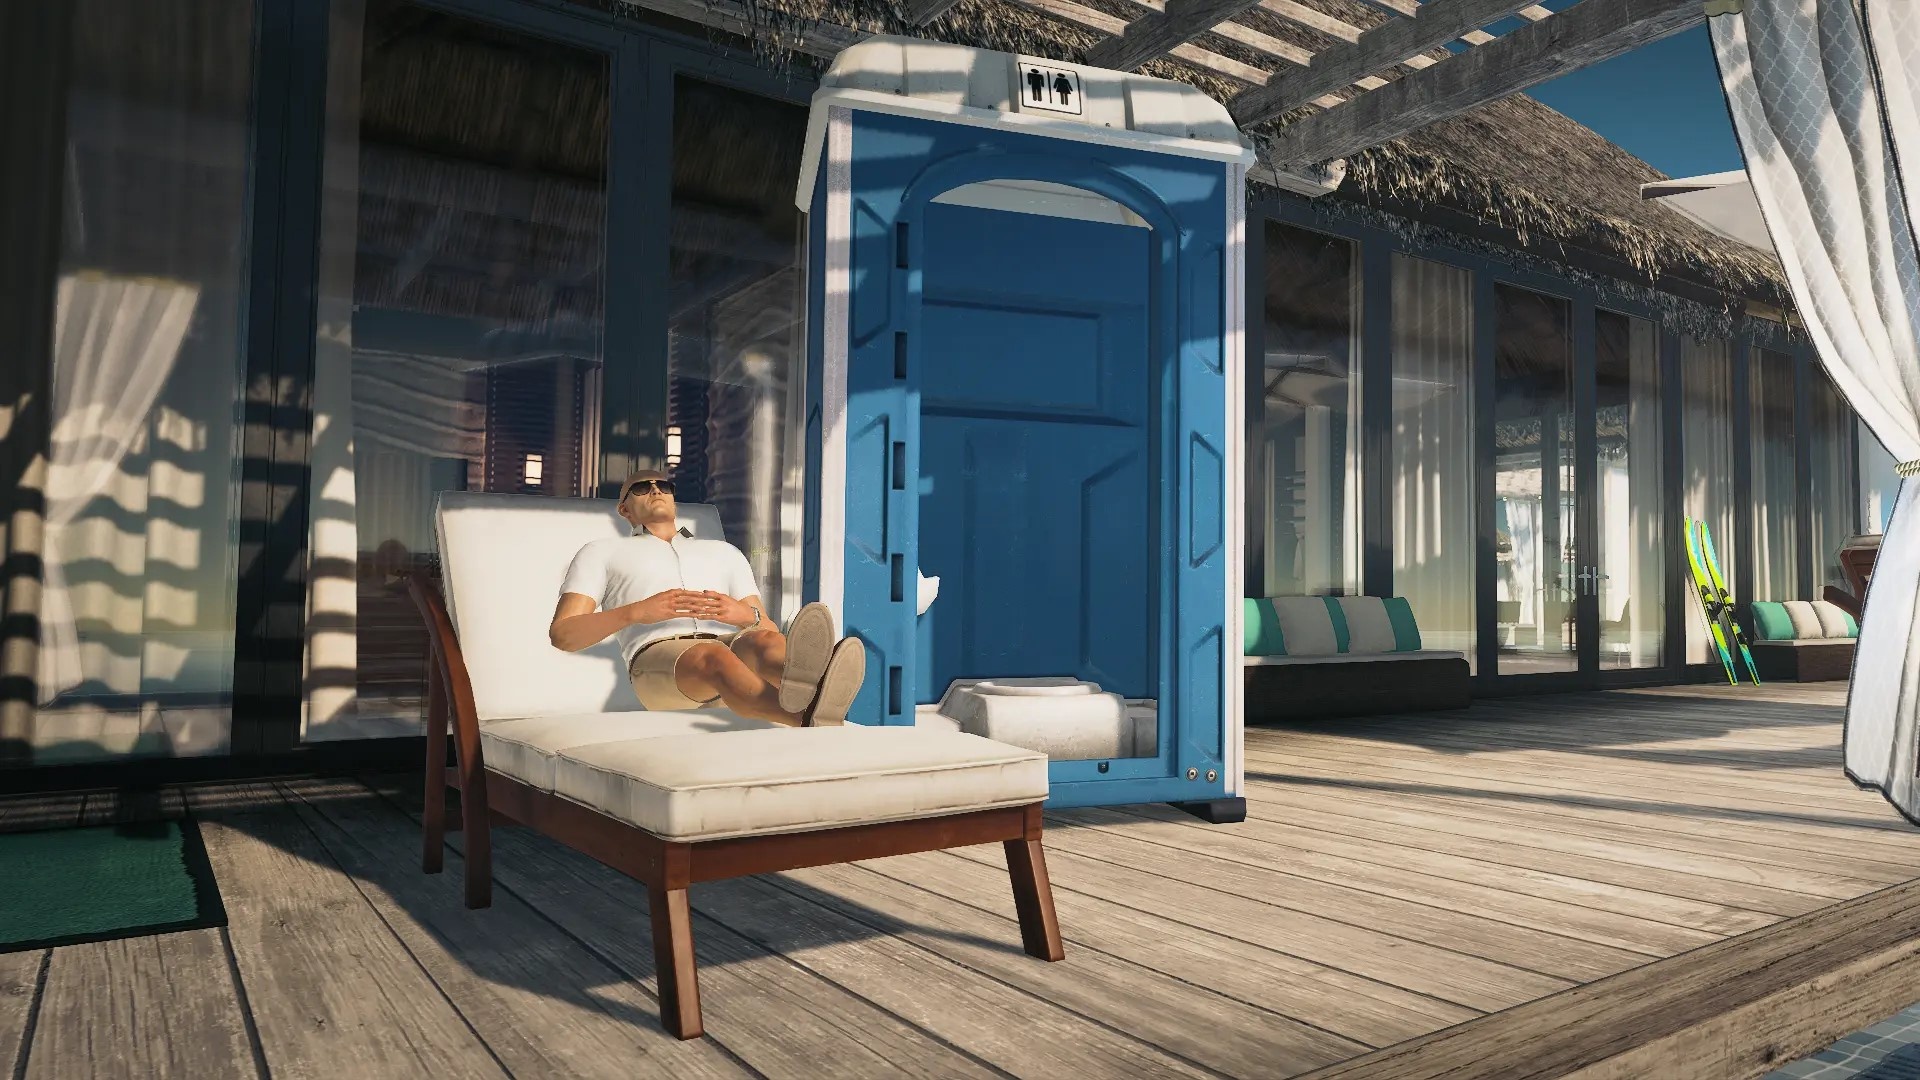  Modder creates Hitman 3's ultimate weapon: A portable, inflatable toilet you can deploy anywhere to drown your targets in 